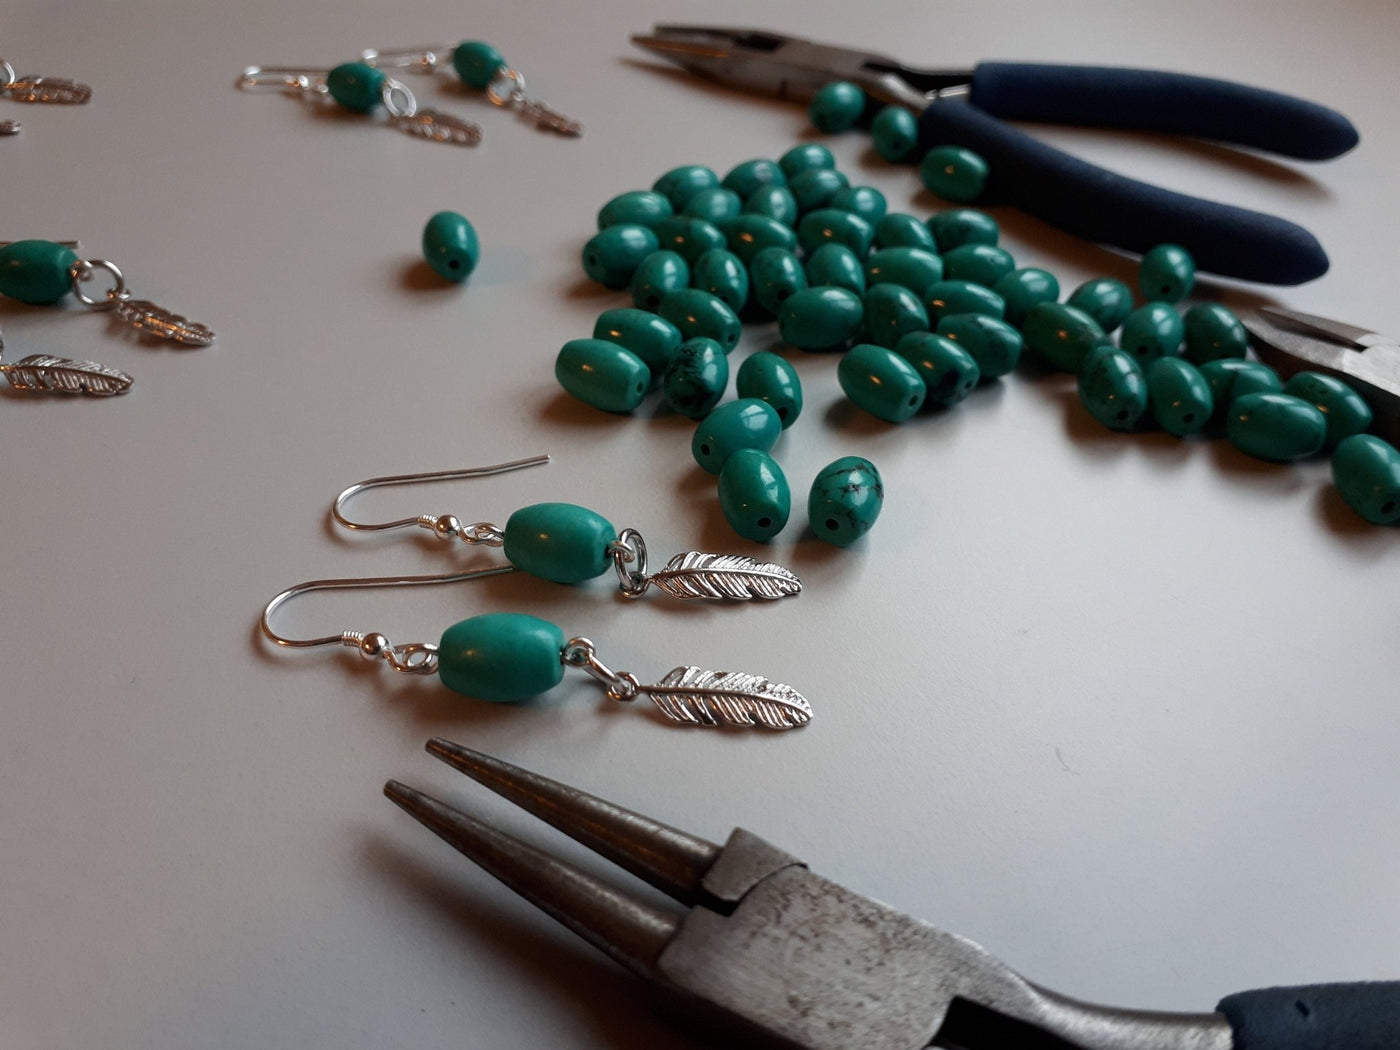 925 Sterling Silver Turquoise and Feather Earrings. - JOANNE MASSEY ARTISAN JEWELLERY